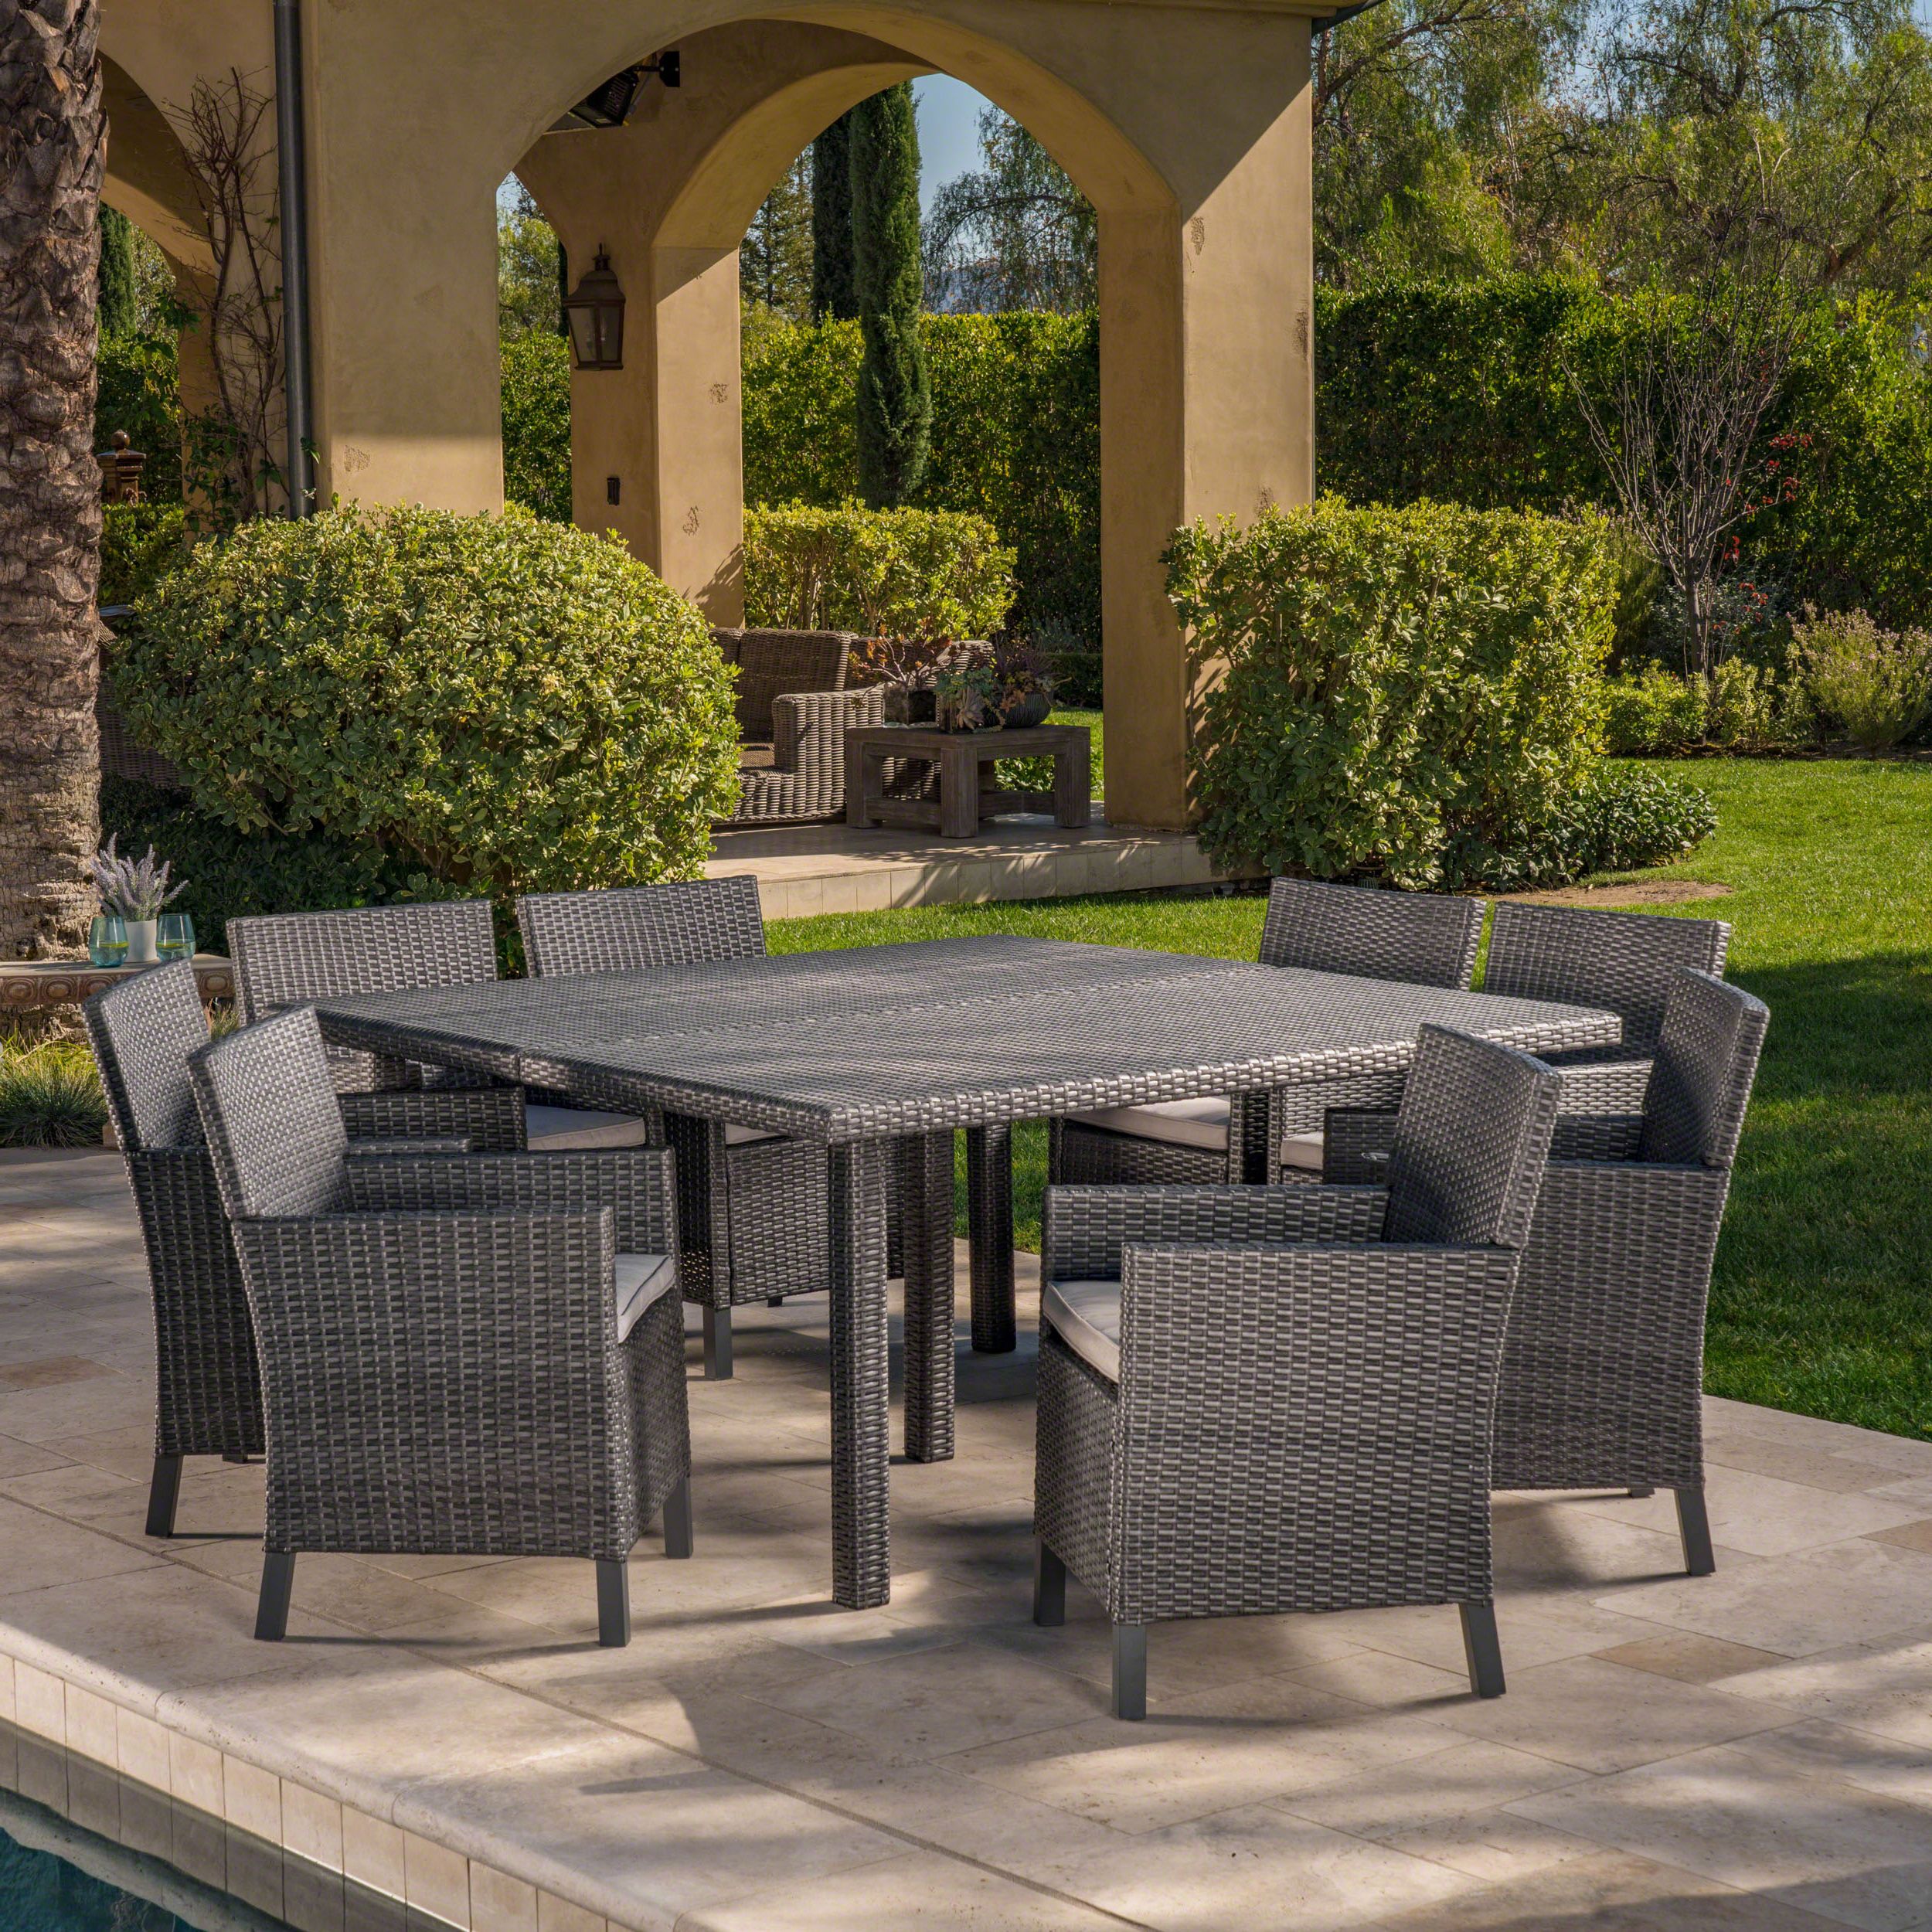 9 Piece Square Patio Dining Sets Within Favorite Alice Outdoor 9 Piece Wicker Square Dining Set With Water Resistant (View 5 of 15)